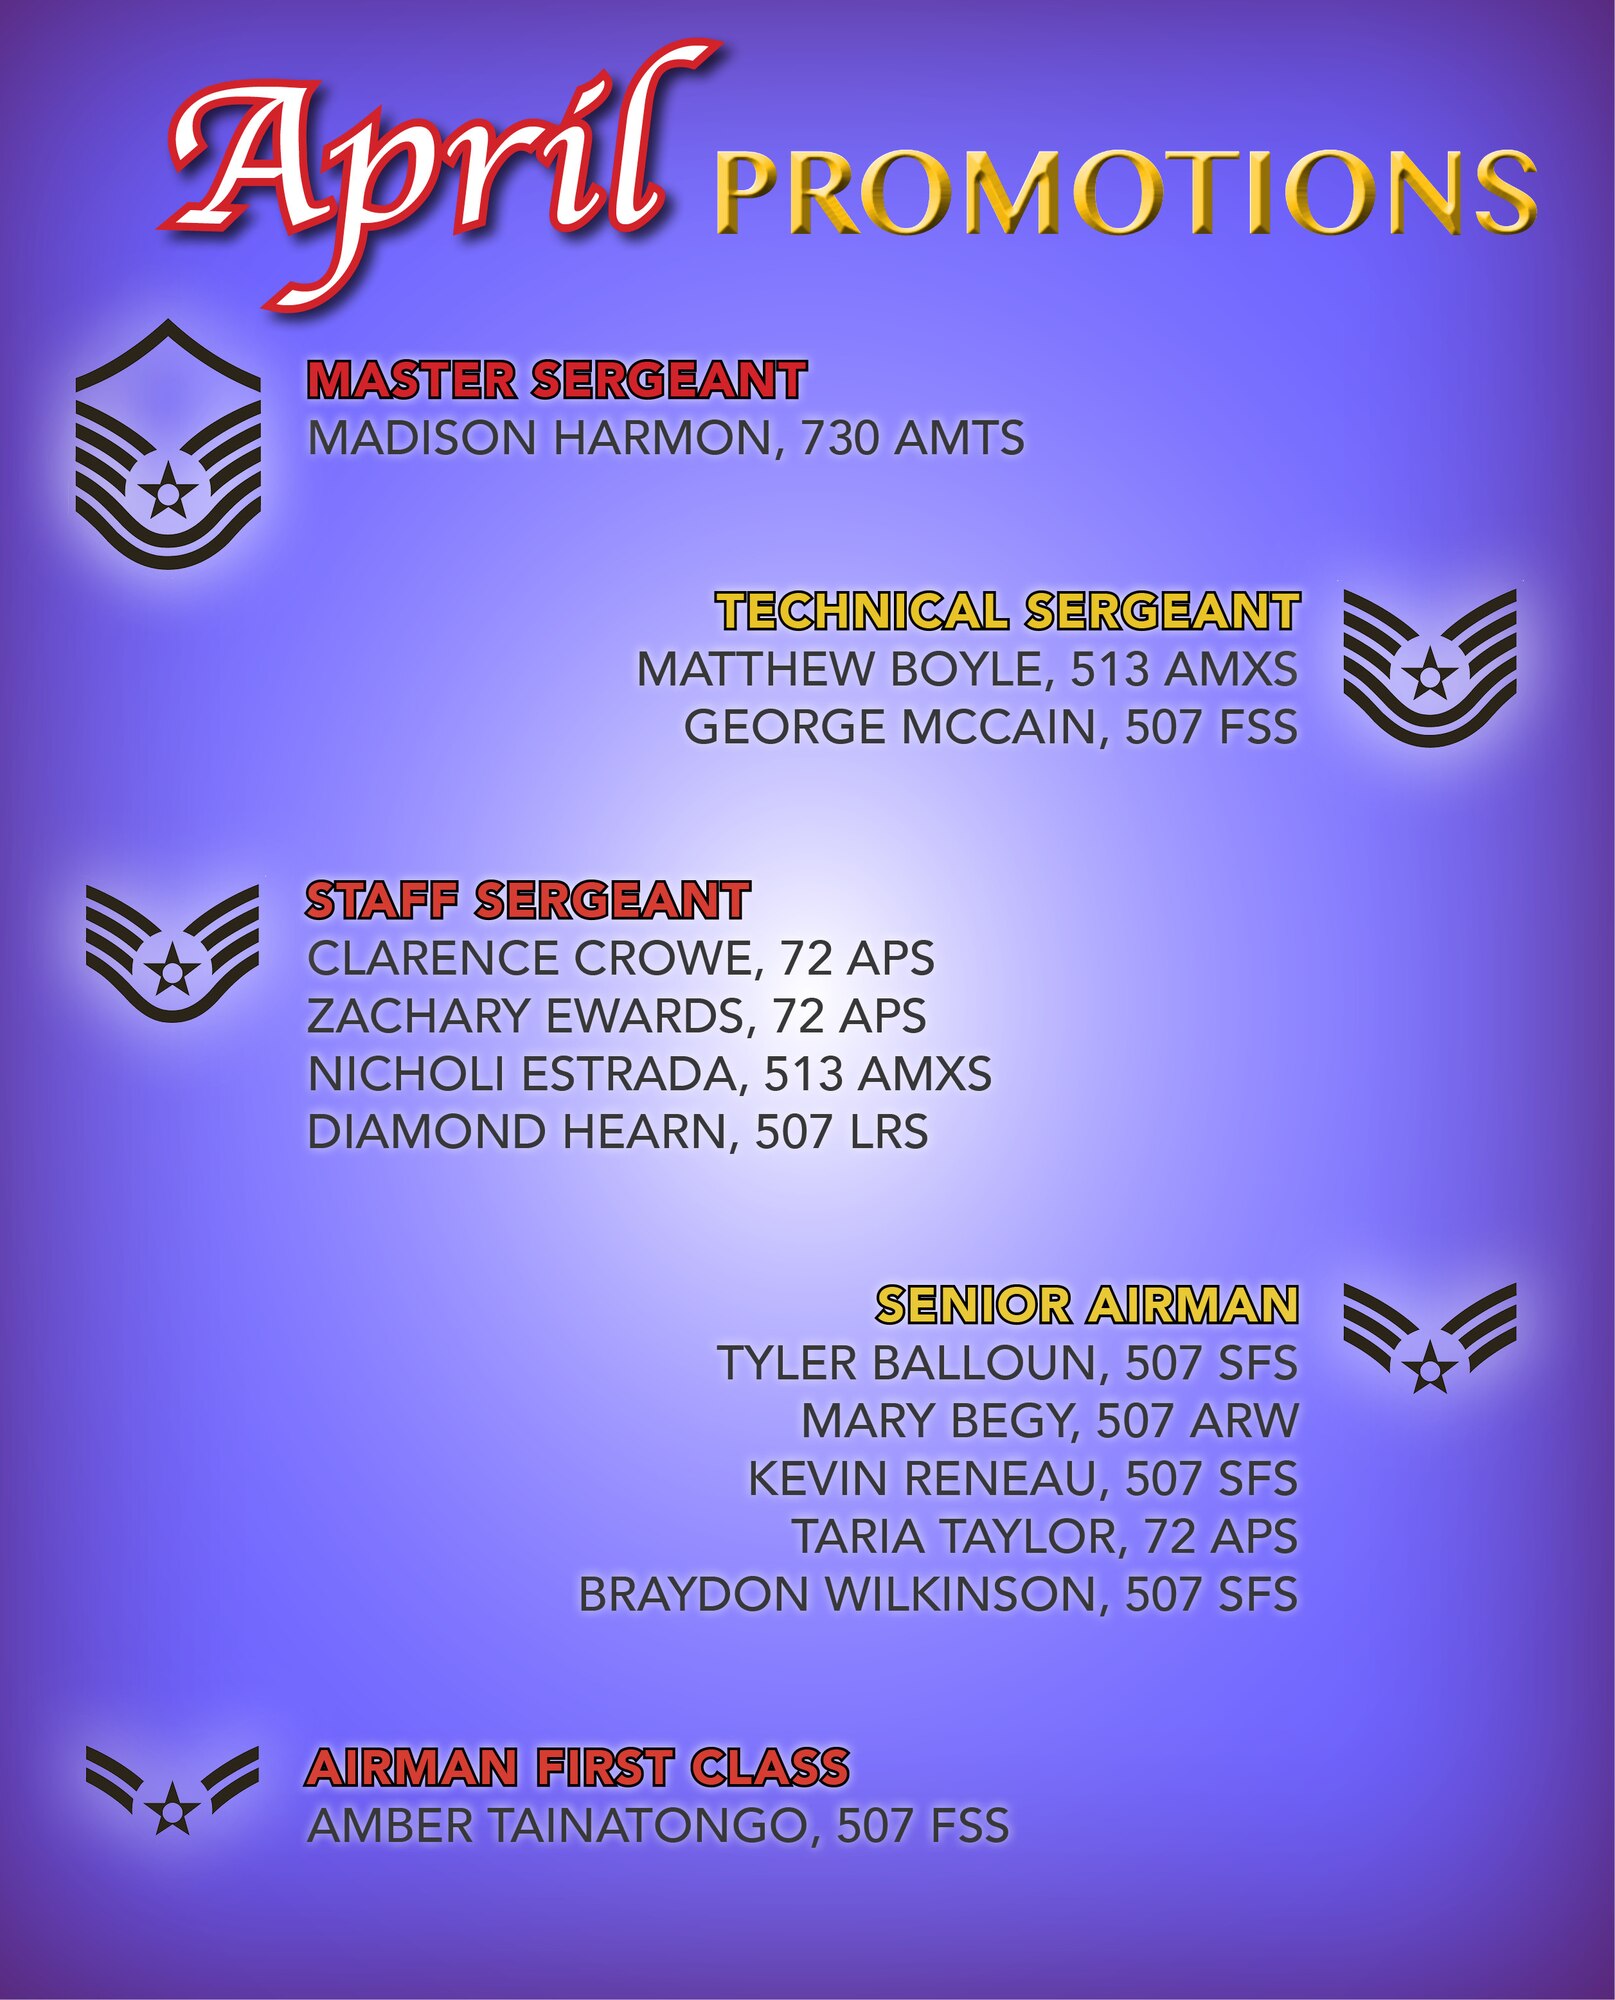 The 507th Air Refueling Wing enlisted promotion list for April 2019 at Tinker Air Force Base, Oklahoma. (U.S. Air Force image by Tech. Sgt. Samantha Mathison)